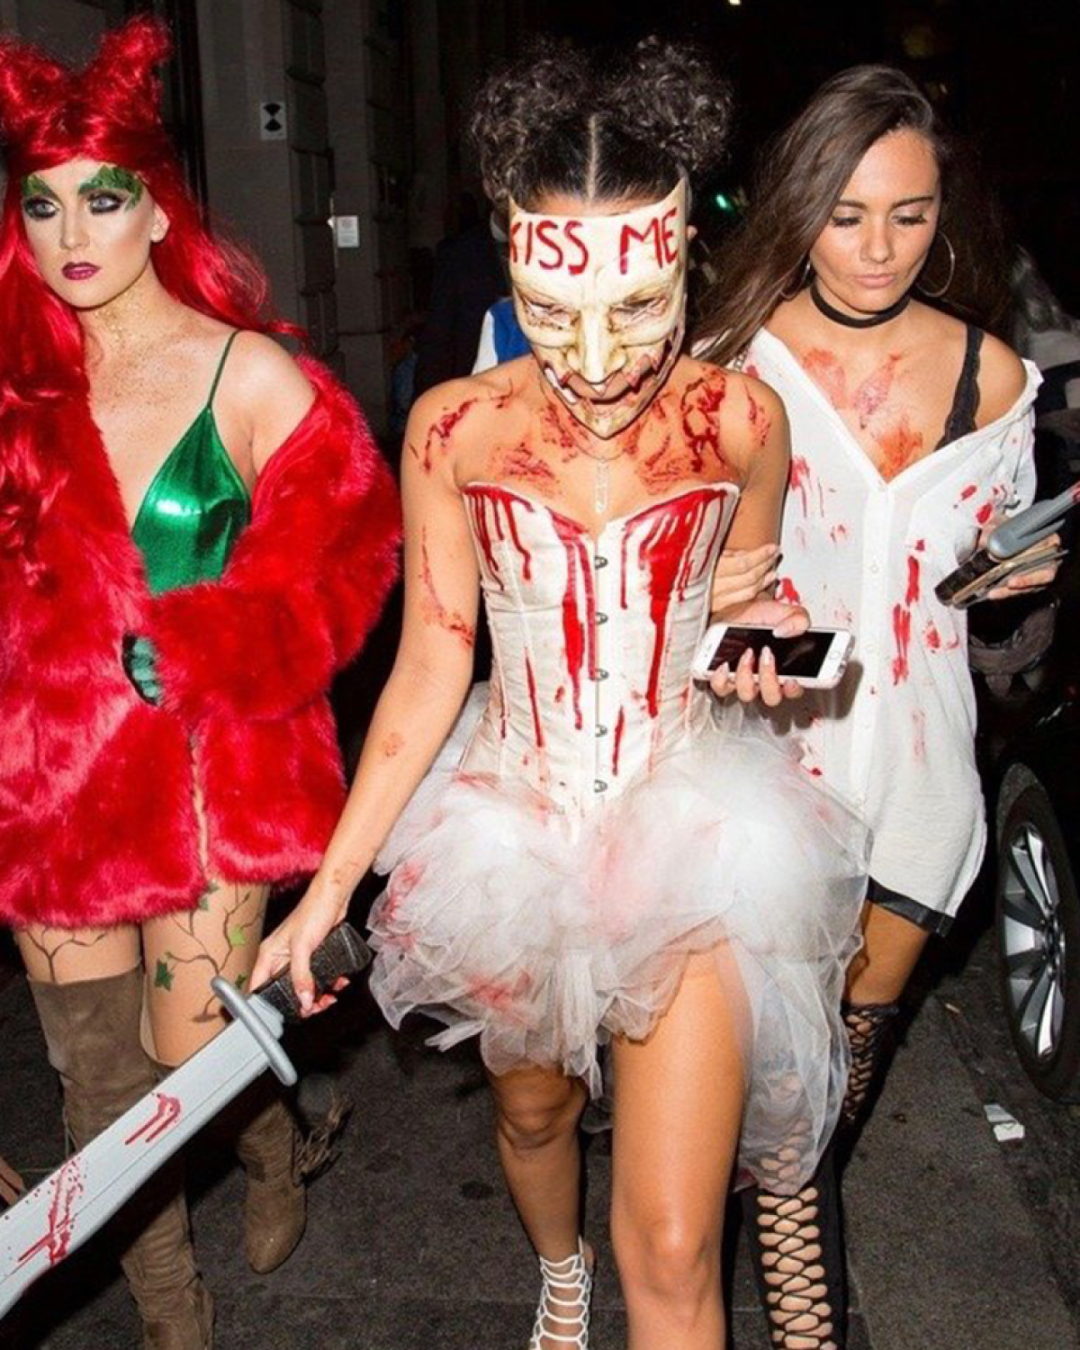 3 girls dressed up for a Halloween bar crawl in Halloween costumes